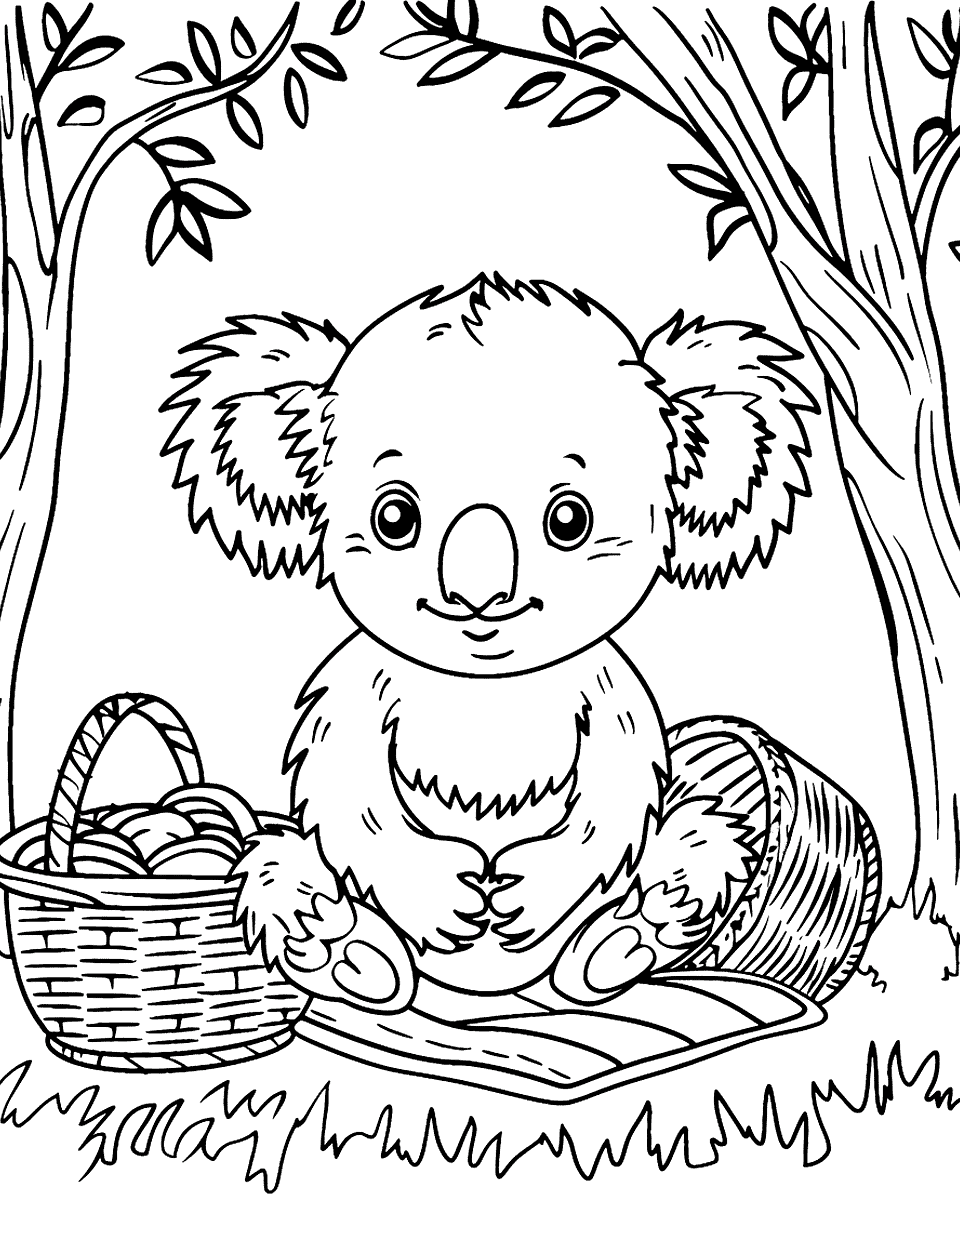 Koala Bear Picnic Coloring Page - A koala sitting on the ground, surrounded by picnic items like a basket and a blanket.